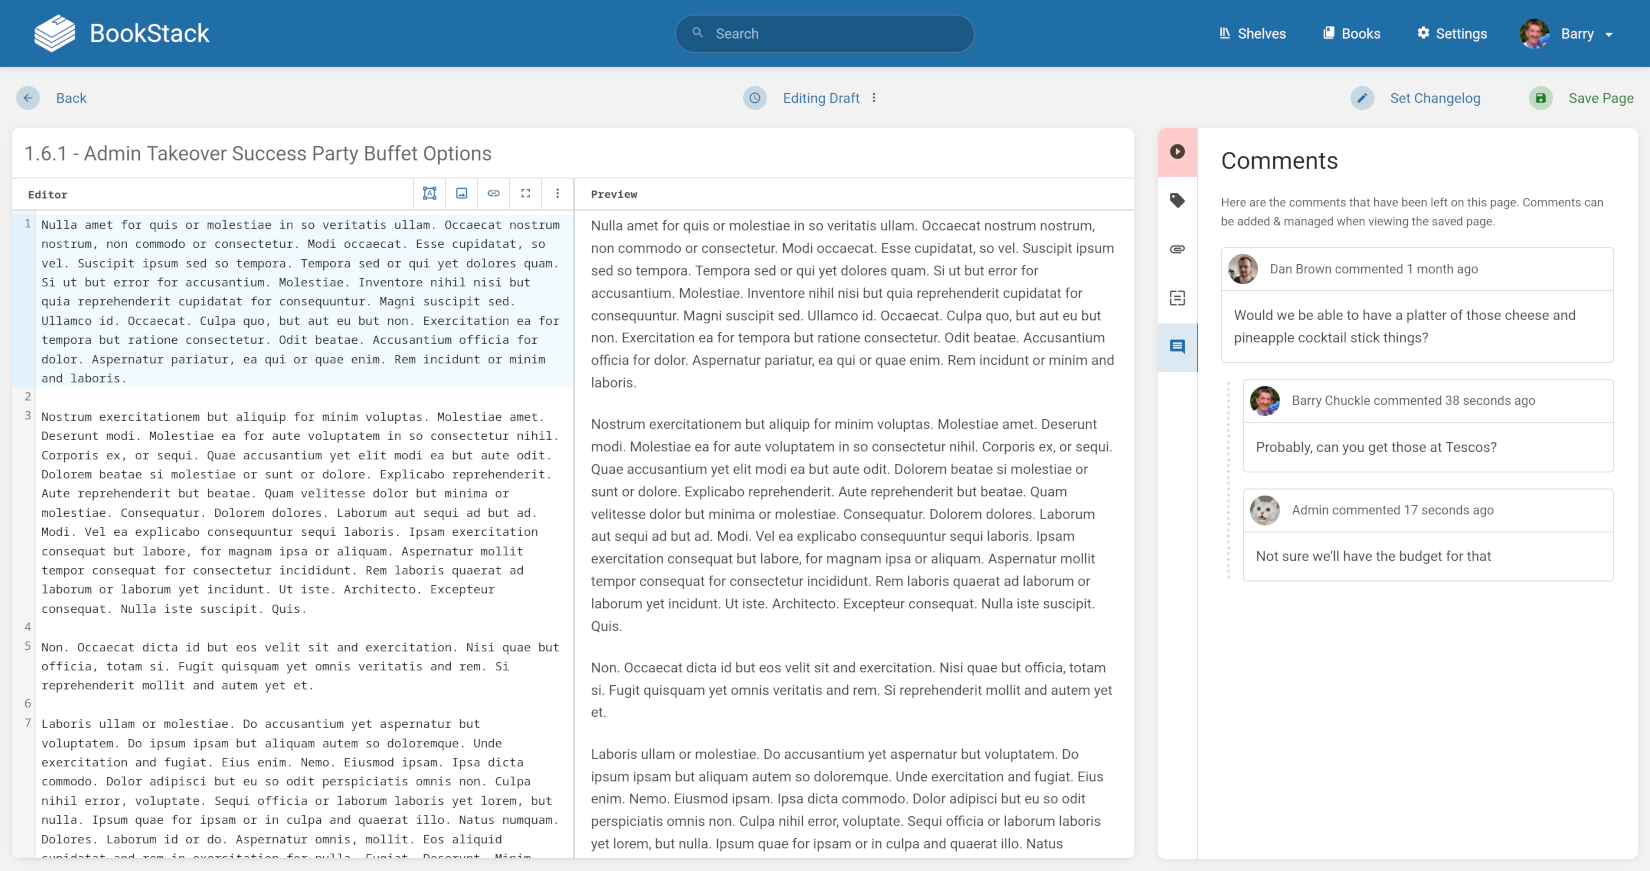 BookStack markdown editor interface with the sidebar toolbox open displaying various comments for the current page